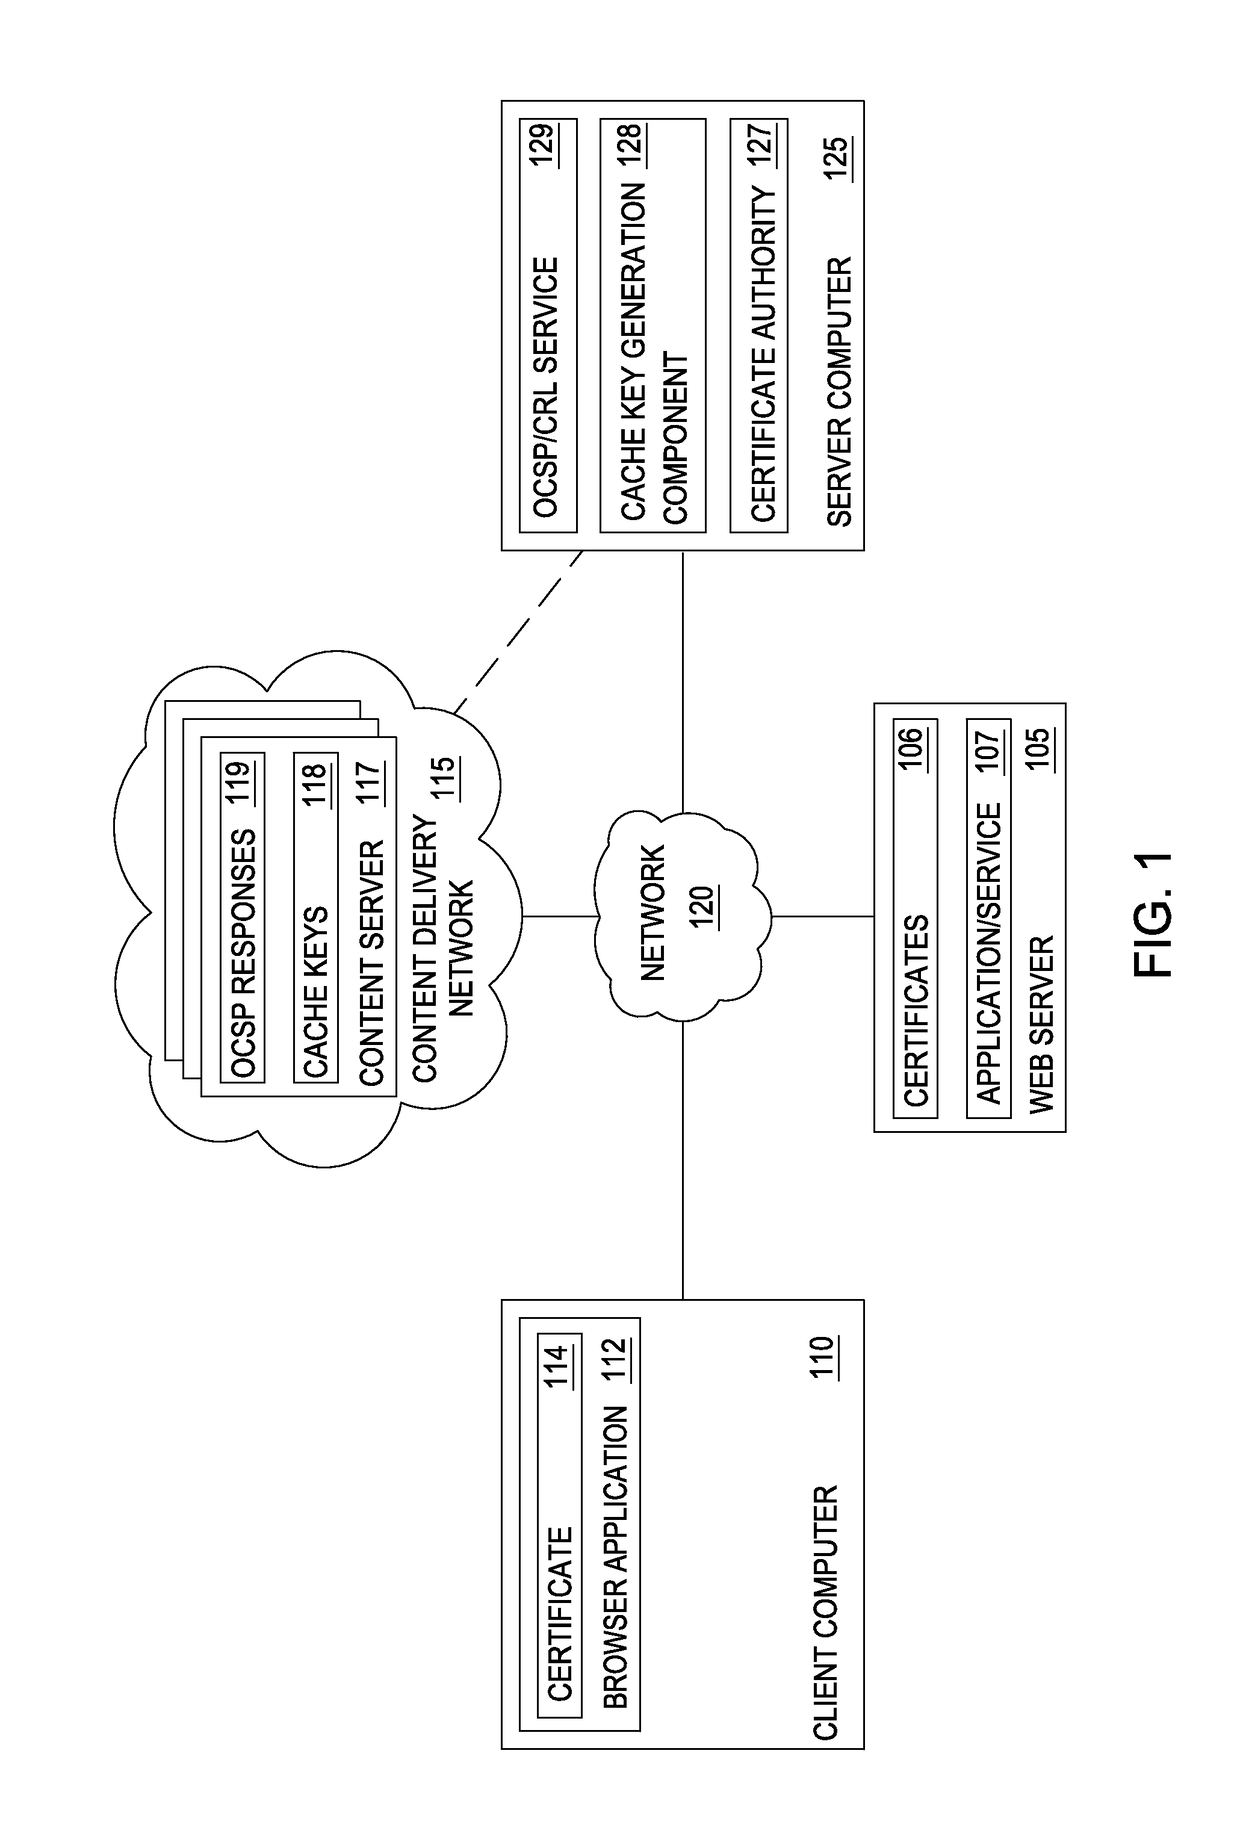 Reducing latency for certificate validity messages using private content delivery networks